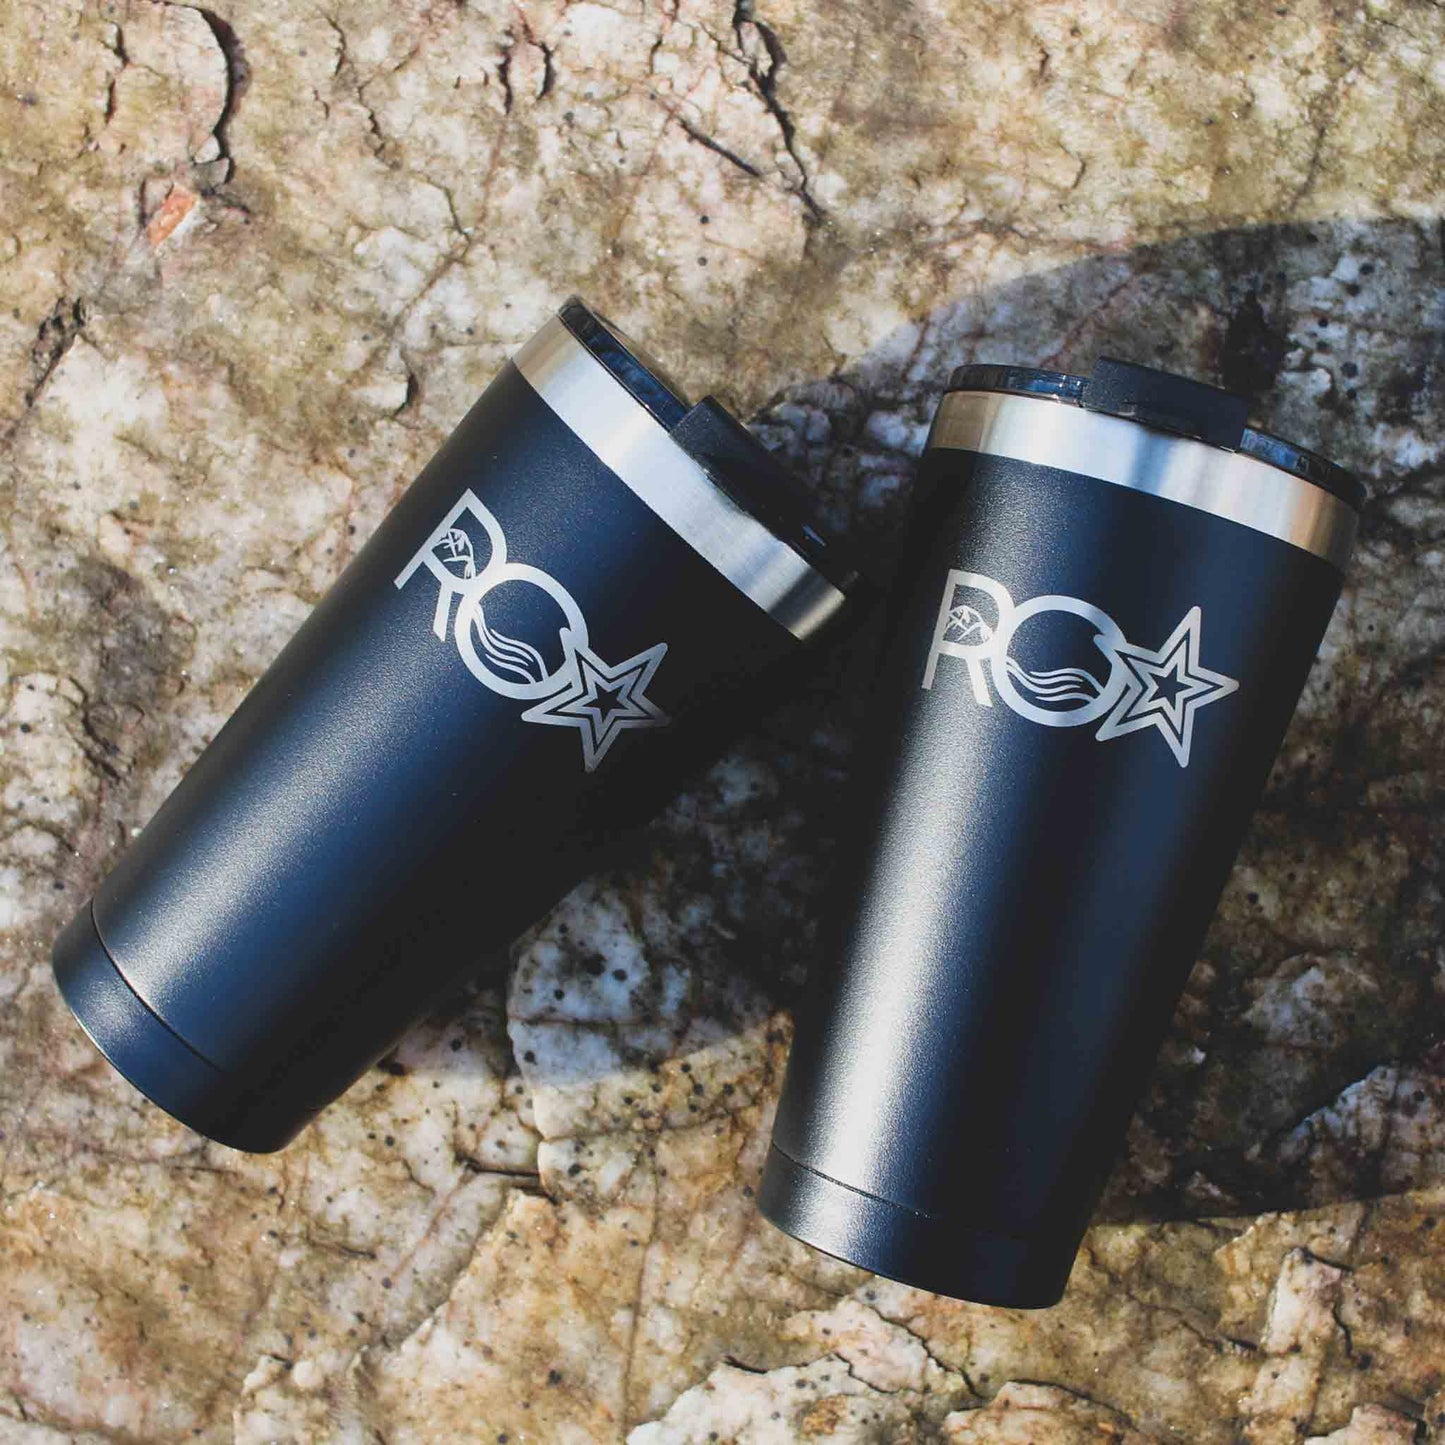 Roanoke Lifestyle - 16 oz. Insulated Cup